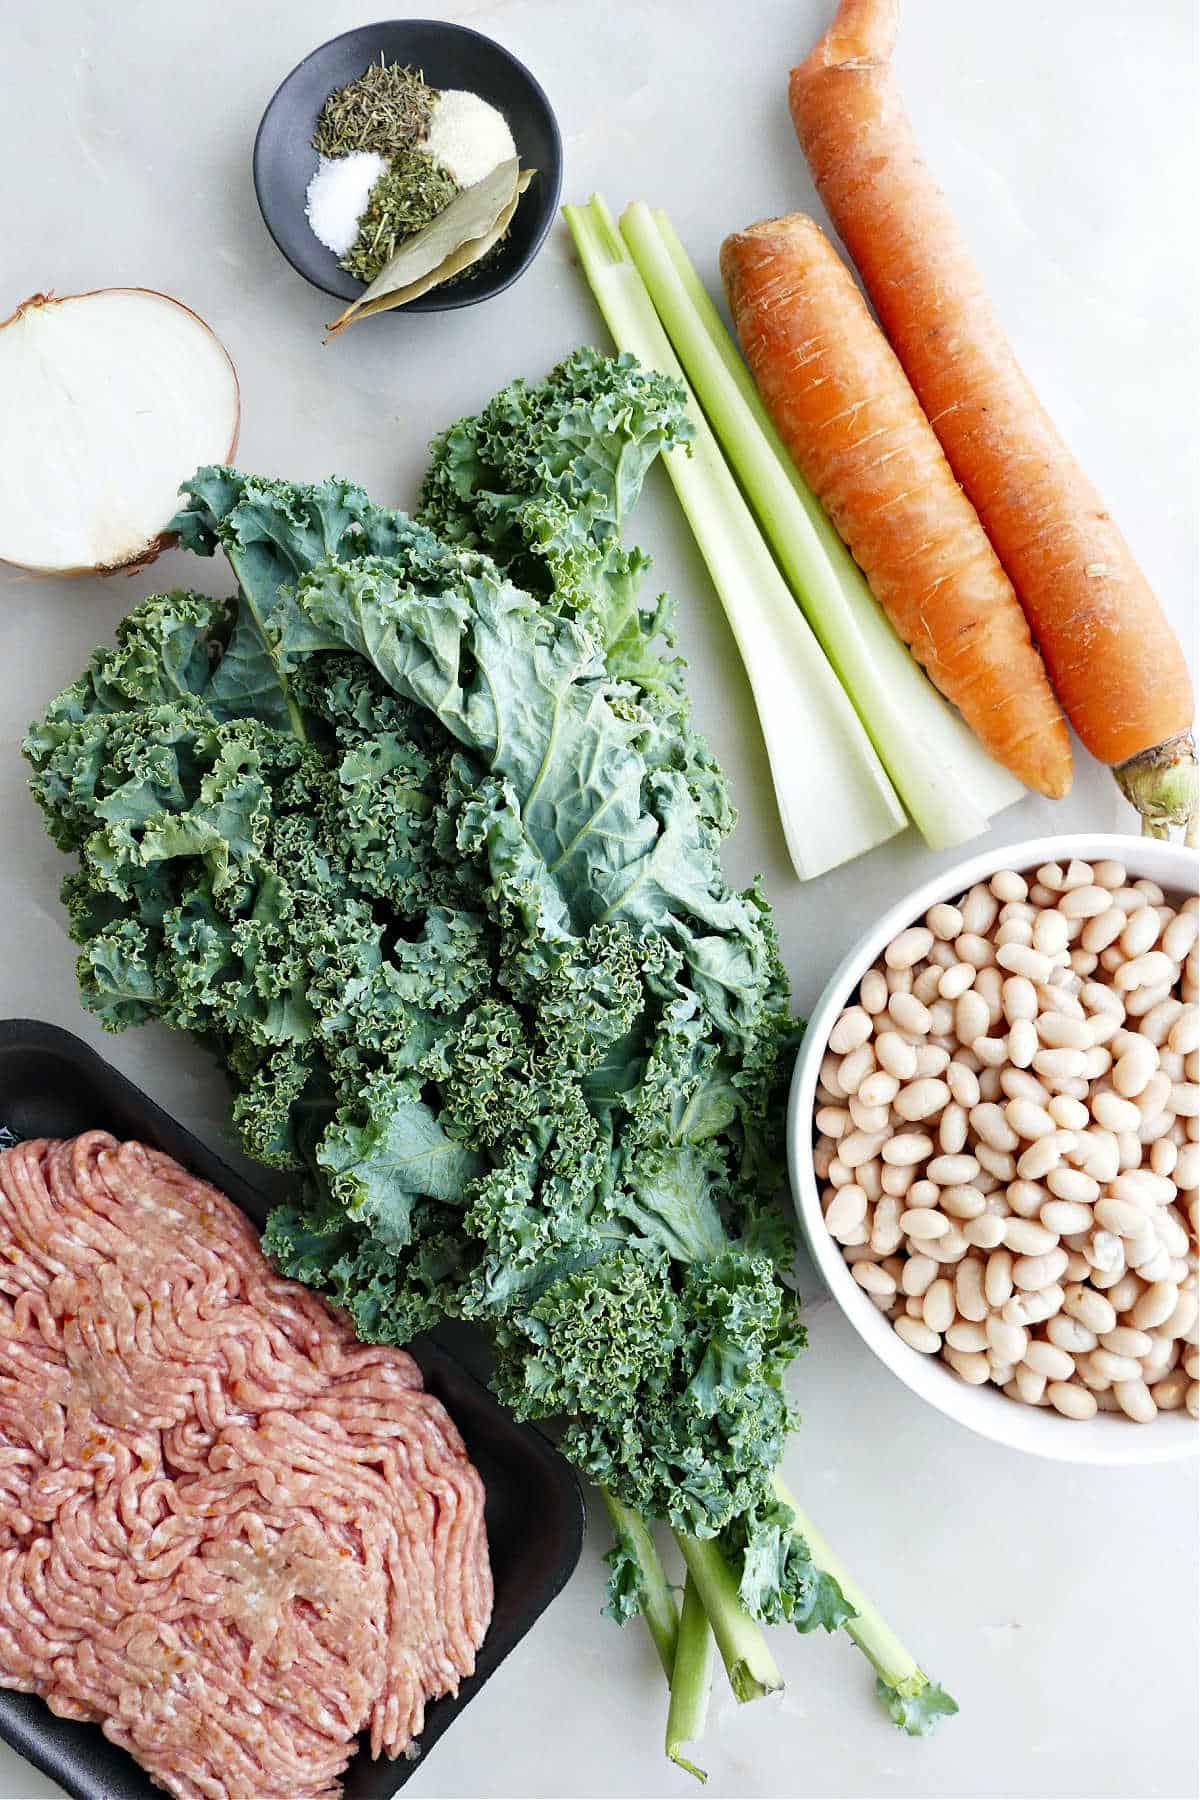 onion, spices, carrot, celery, white beans, kale, and sausage on a counter